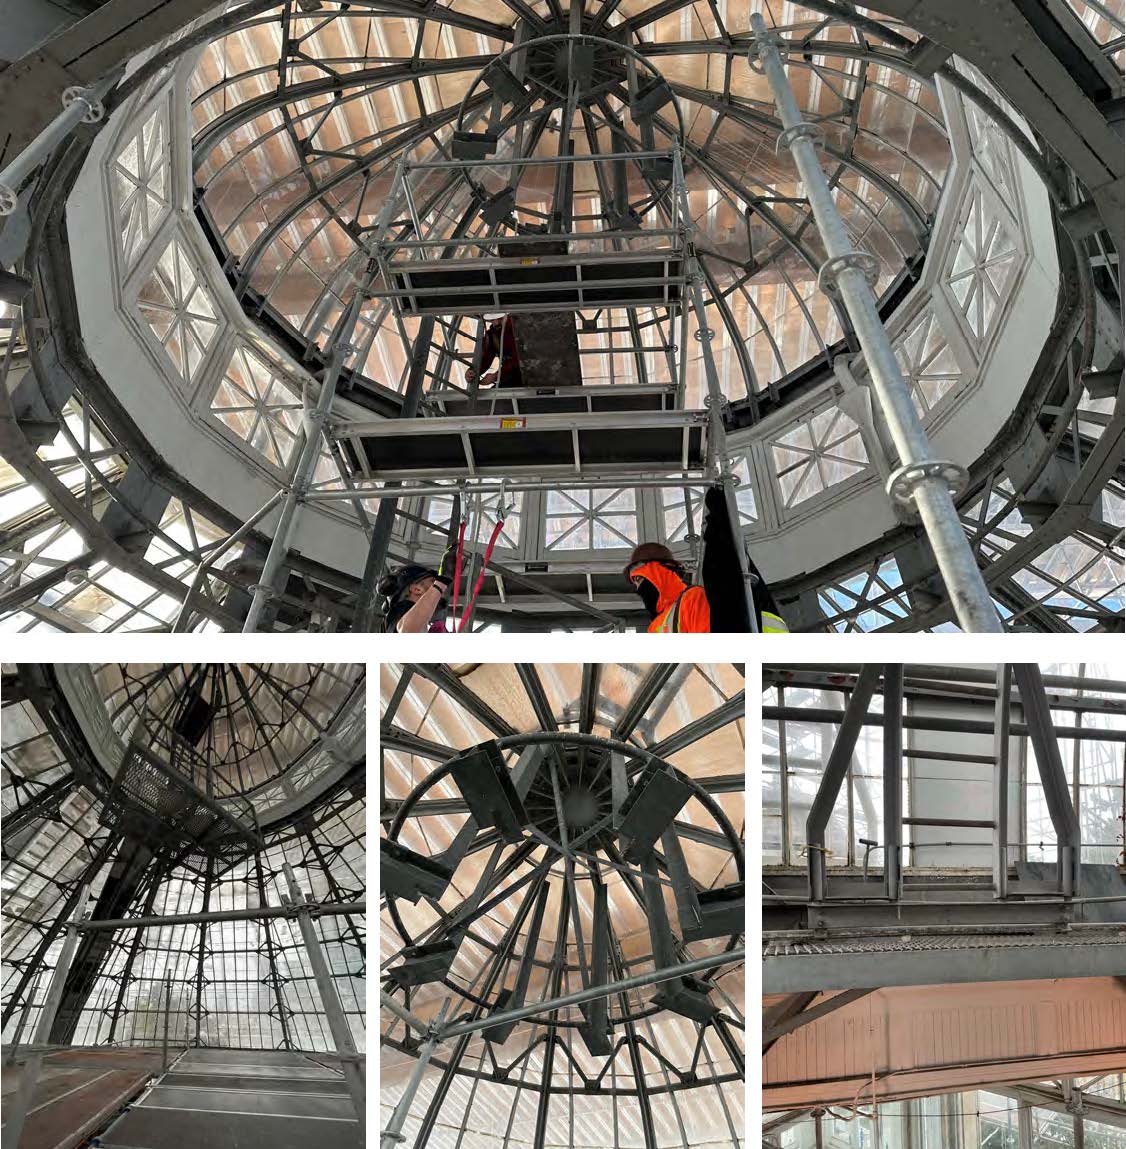 A photograph with four images (one larger main images and three smaller images below it) showing the interior work happening at the Palm House building. The main large image shows the domed roof with two contractors while under construction. From left to right, there is an image of the sides of the domed roof with scaffolding, then an image that focuses on the centre of the domed roof and lighting, and then an image that focuses on the scaffolding platform around the perimeter of the Palm House. 